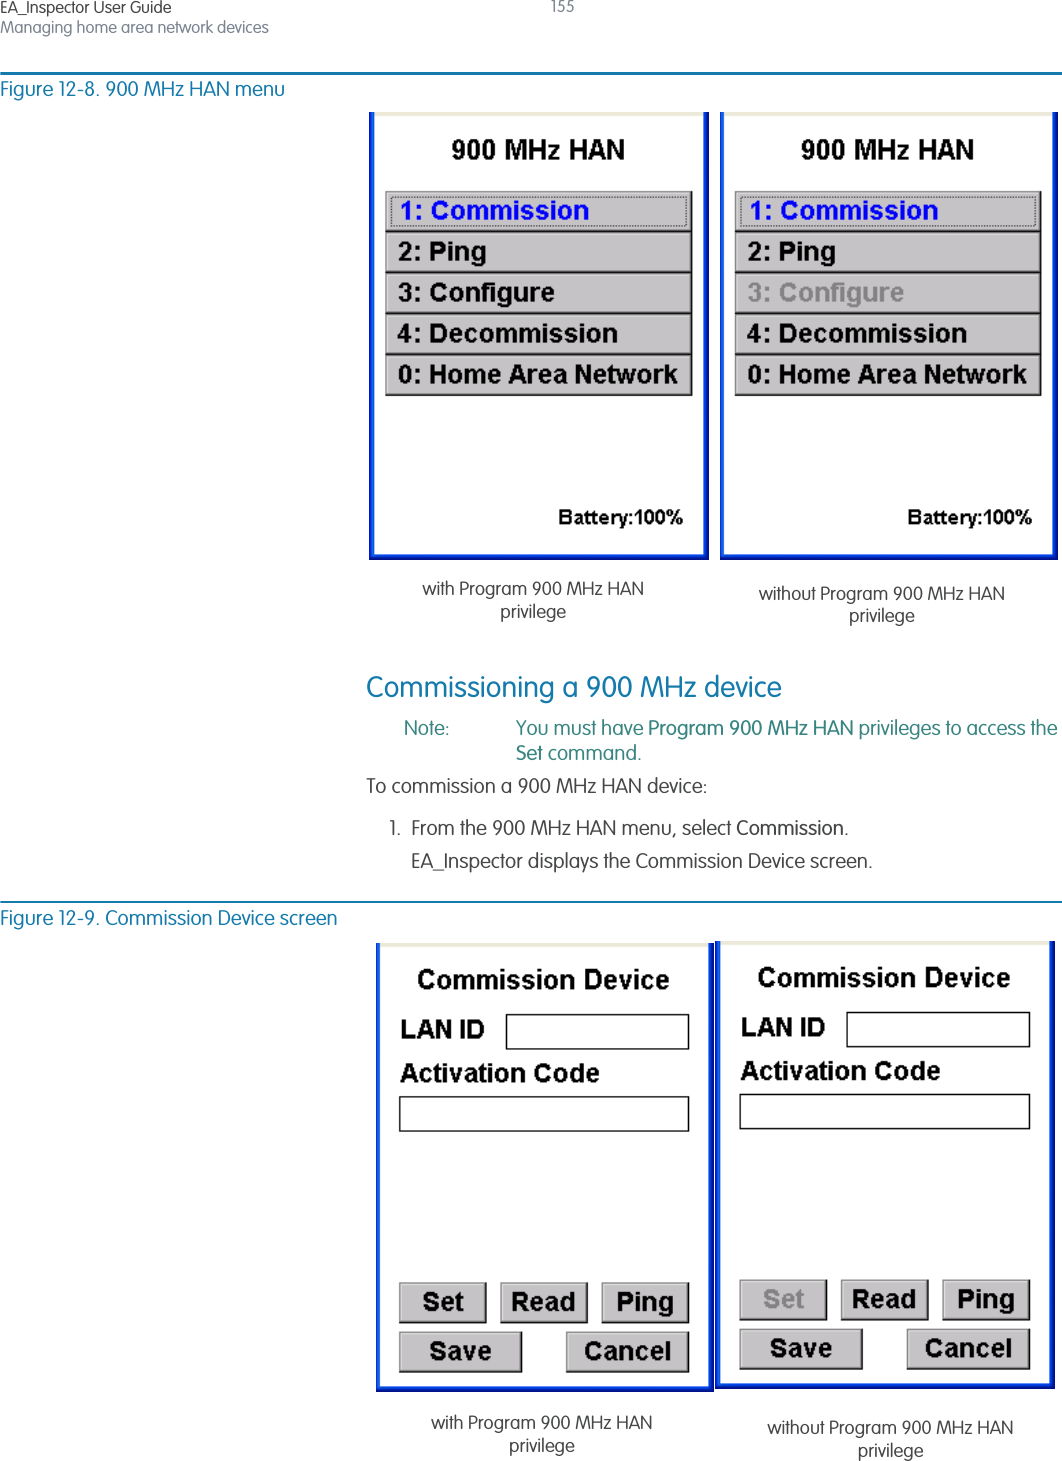 EA_Inspector User GuideManaging home area network devices155Figure 12-8. 900 MHz HAN menuCommissioning a 900 MHz deviceNote: You must have Program 900 MHz HAN privileges to access the Set command.To commission a 900 MHz HAN device:1. From the 900 MHz HAN menu, select Commission.EA_Inspector displays the Commission Device screen.Figure 12-9. Commission Device screenwith Program 900 MHz HANprivilege without Program 900 MHz HANprivilegewith Program 900 MHz HANprivilege without Program 900 MHz HANprivilege